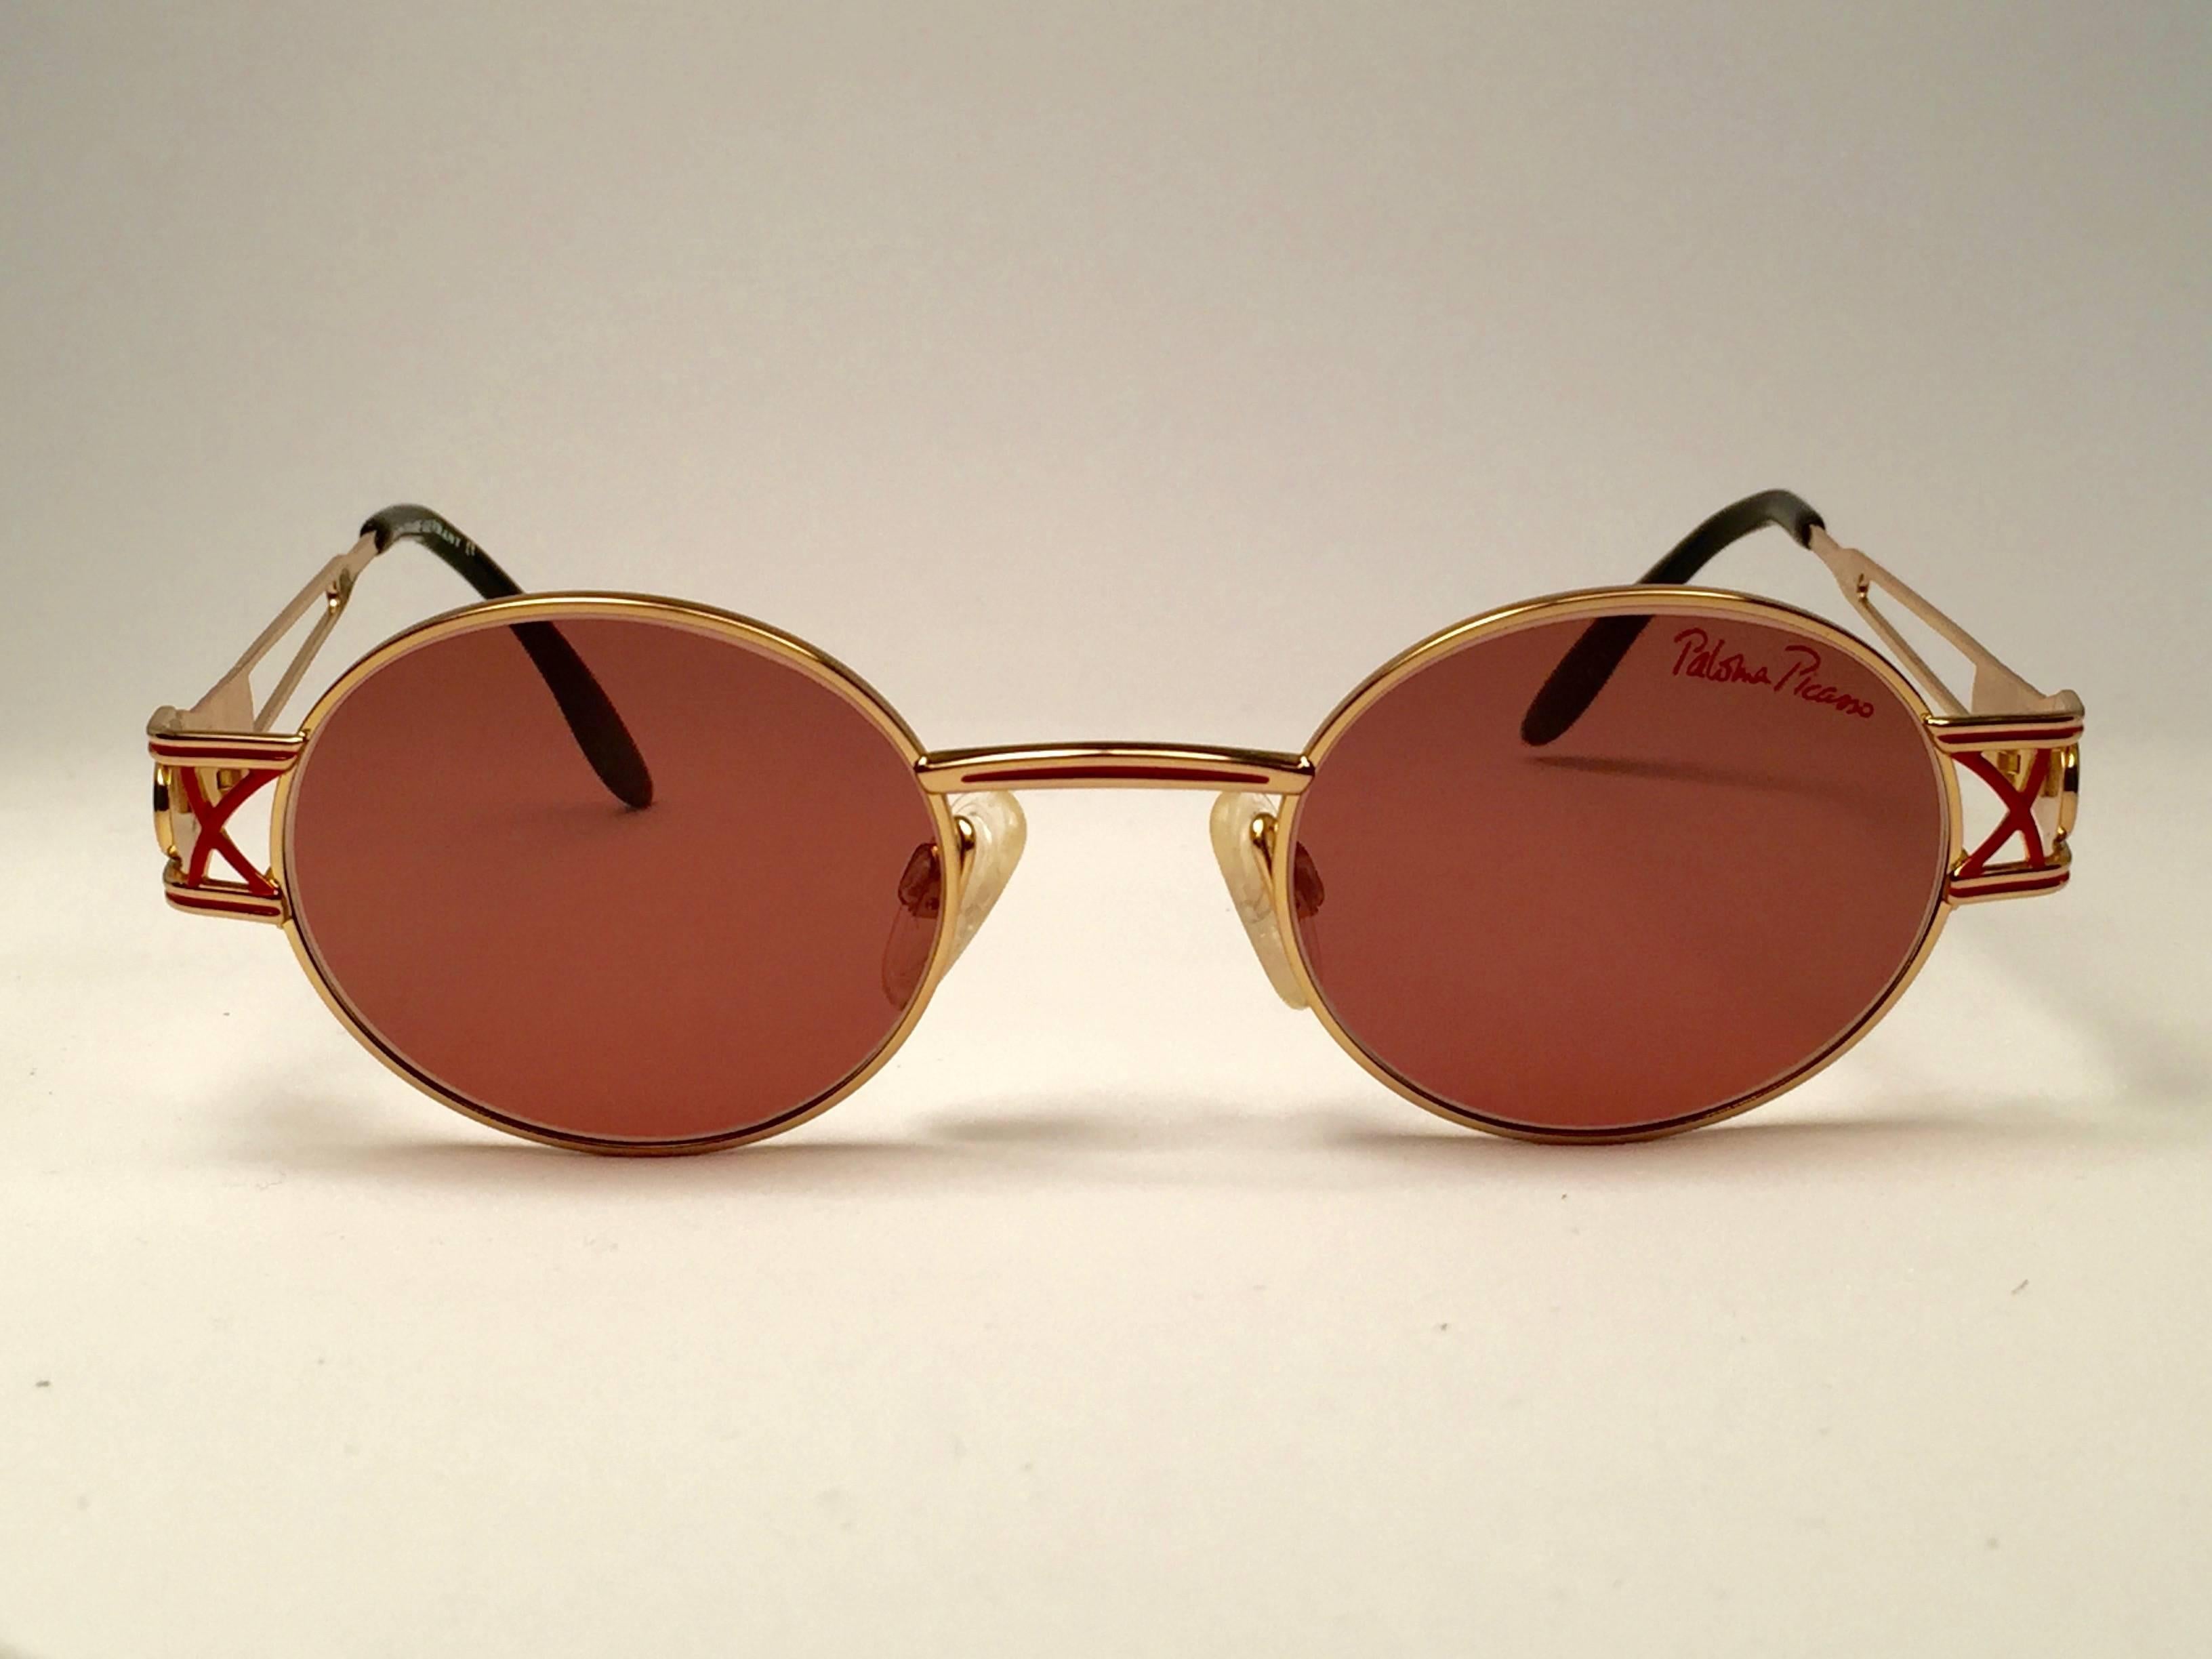 Mint Vintage Paloma Picasso gold with red details Sunglasses.

Made in Germany 1980's. 

Frame with minor wear and tarnish due to storage. 

Made in Germany.
